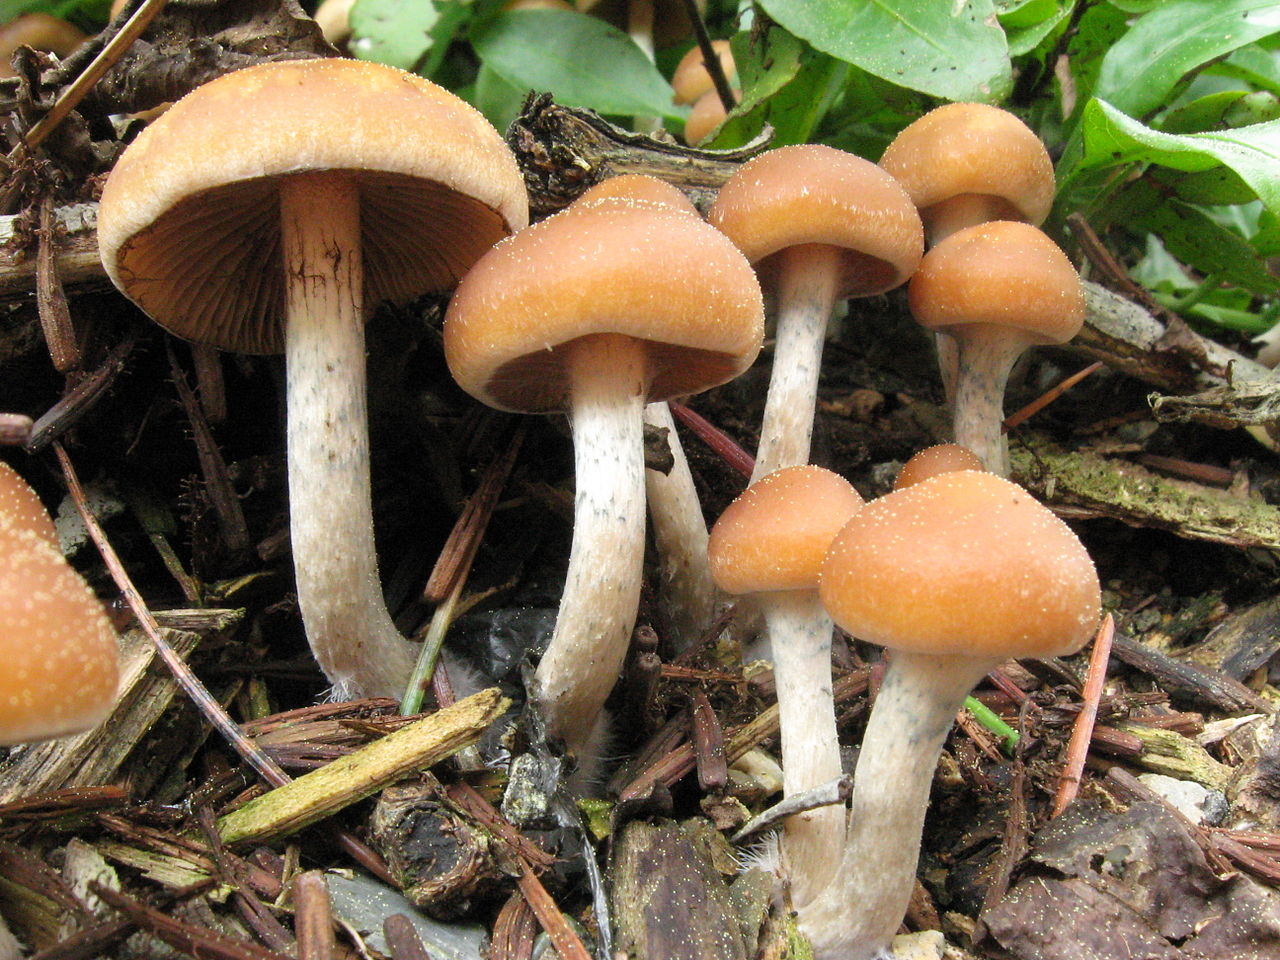 With These 5 Tips One Can Have An Amazing Magic Mushroom Trip!